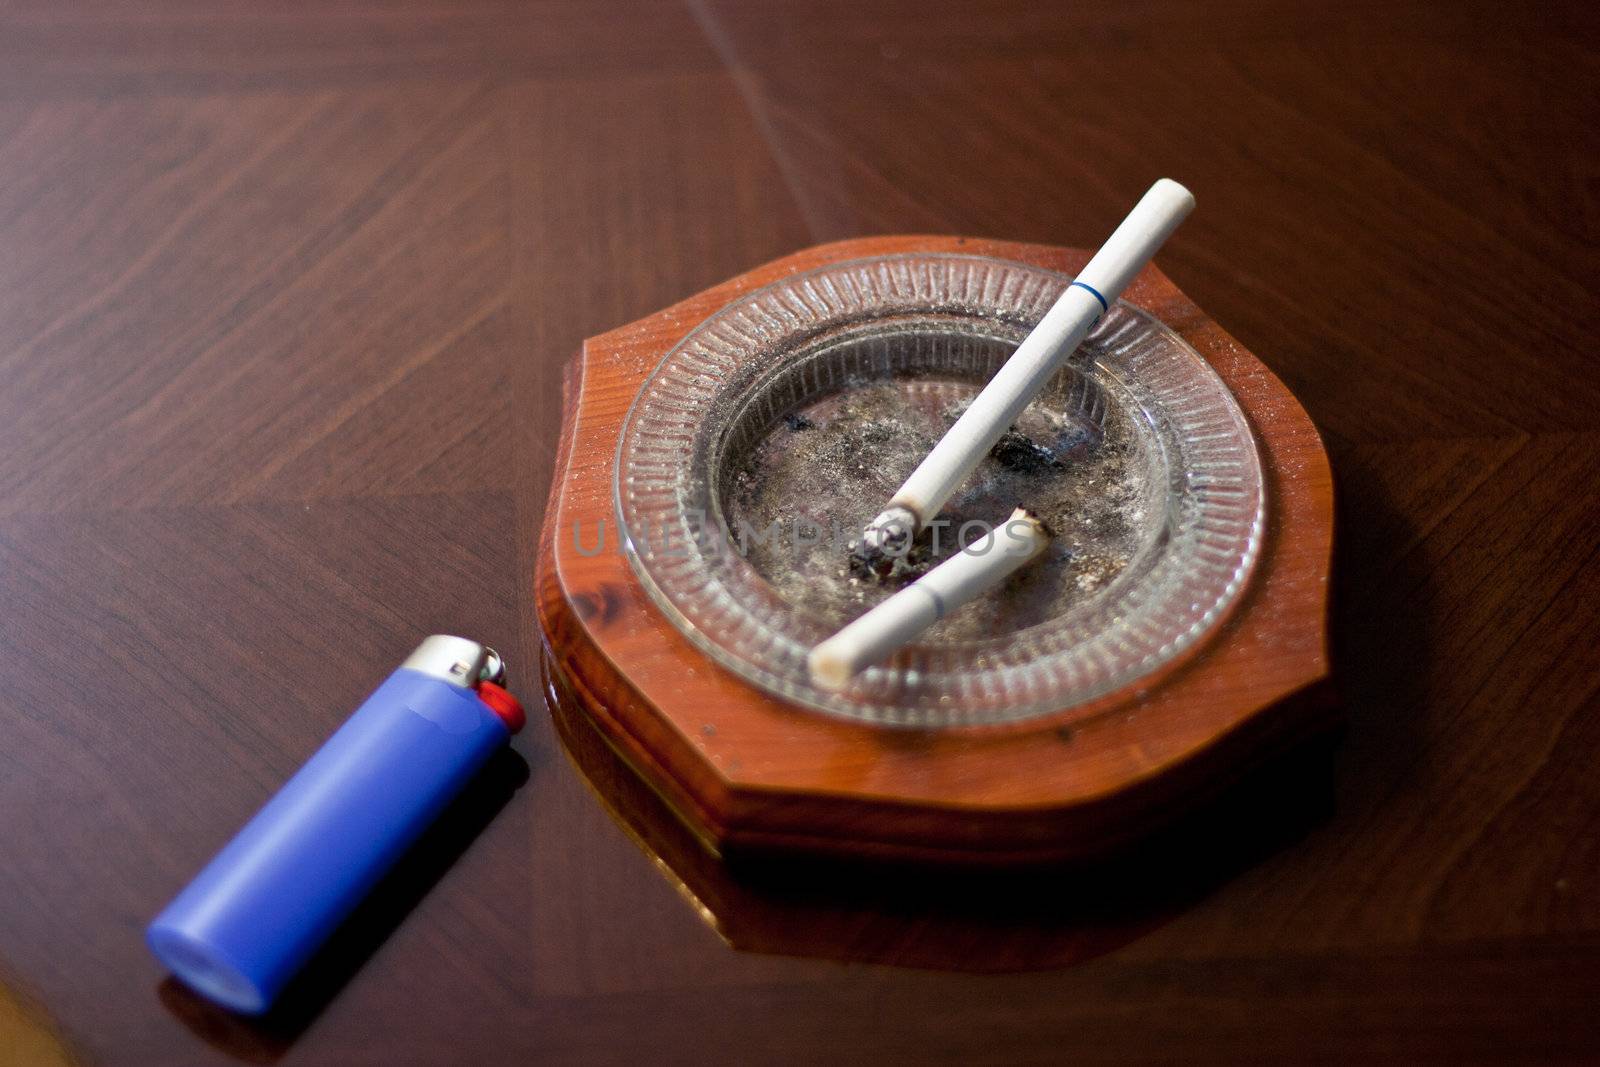 Cigarettes in ash tray. by rothphotosc